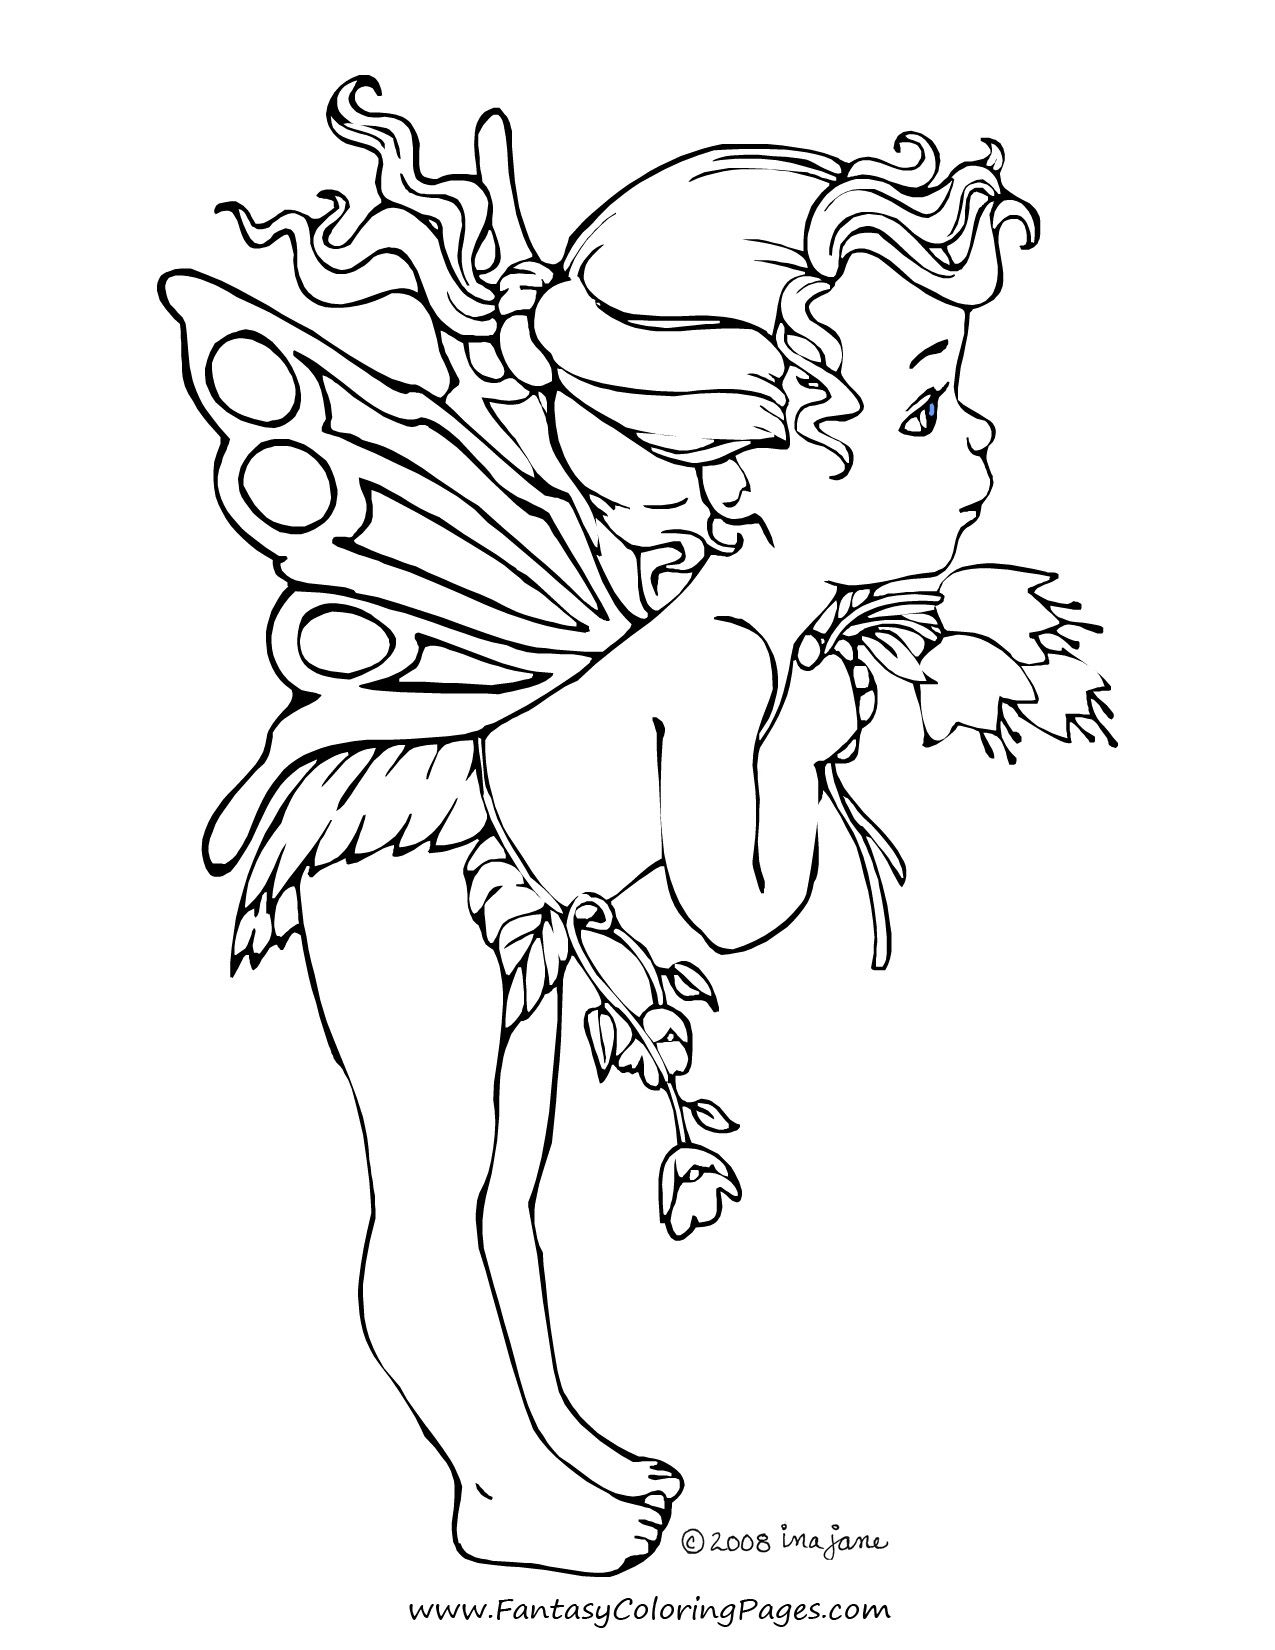 Coloring Pages Fairies Realistic Fairy For Adults Free Books 1275 - Free Printable Coloring Pages Fairies Adults